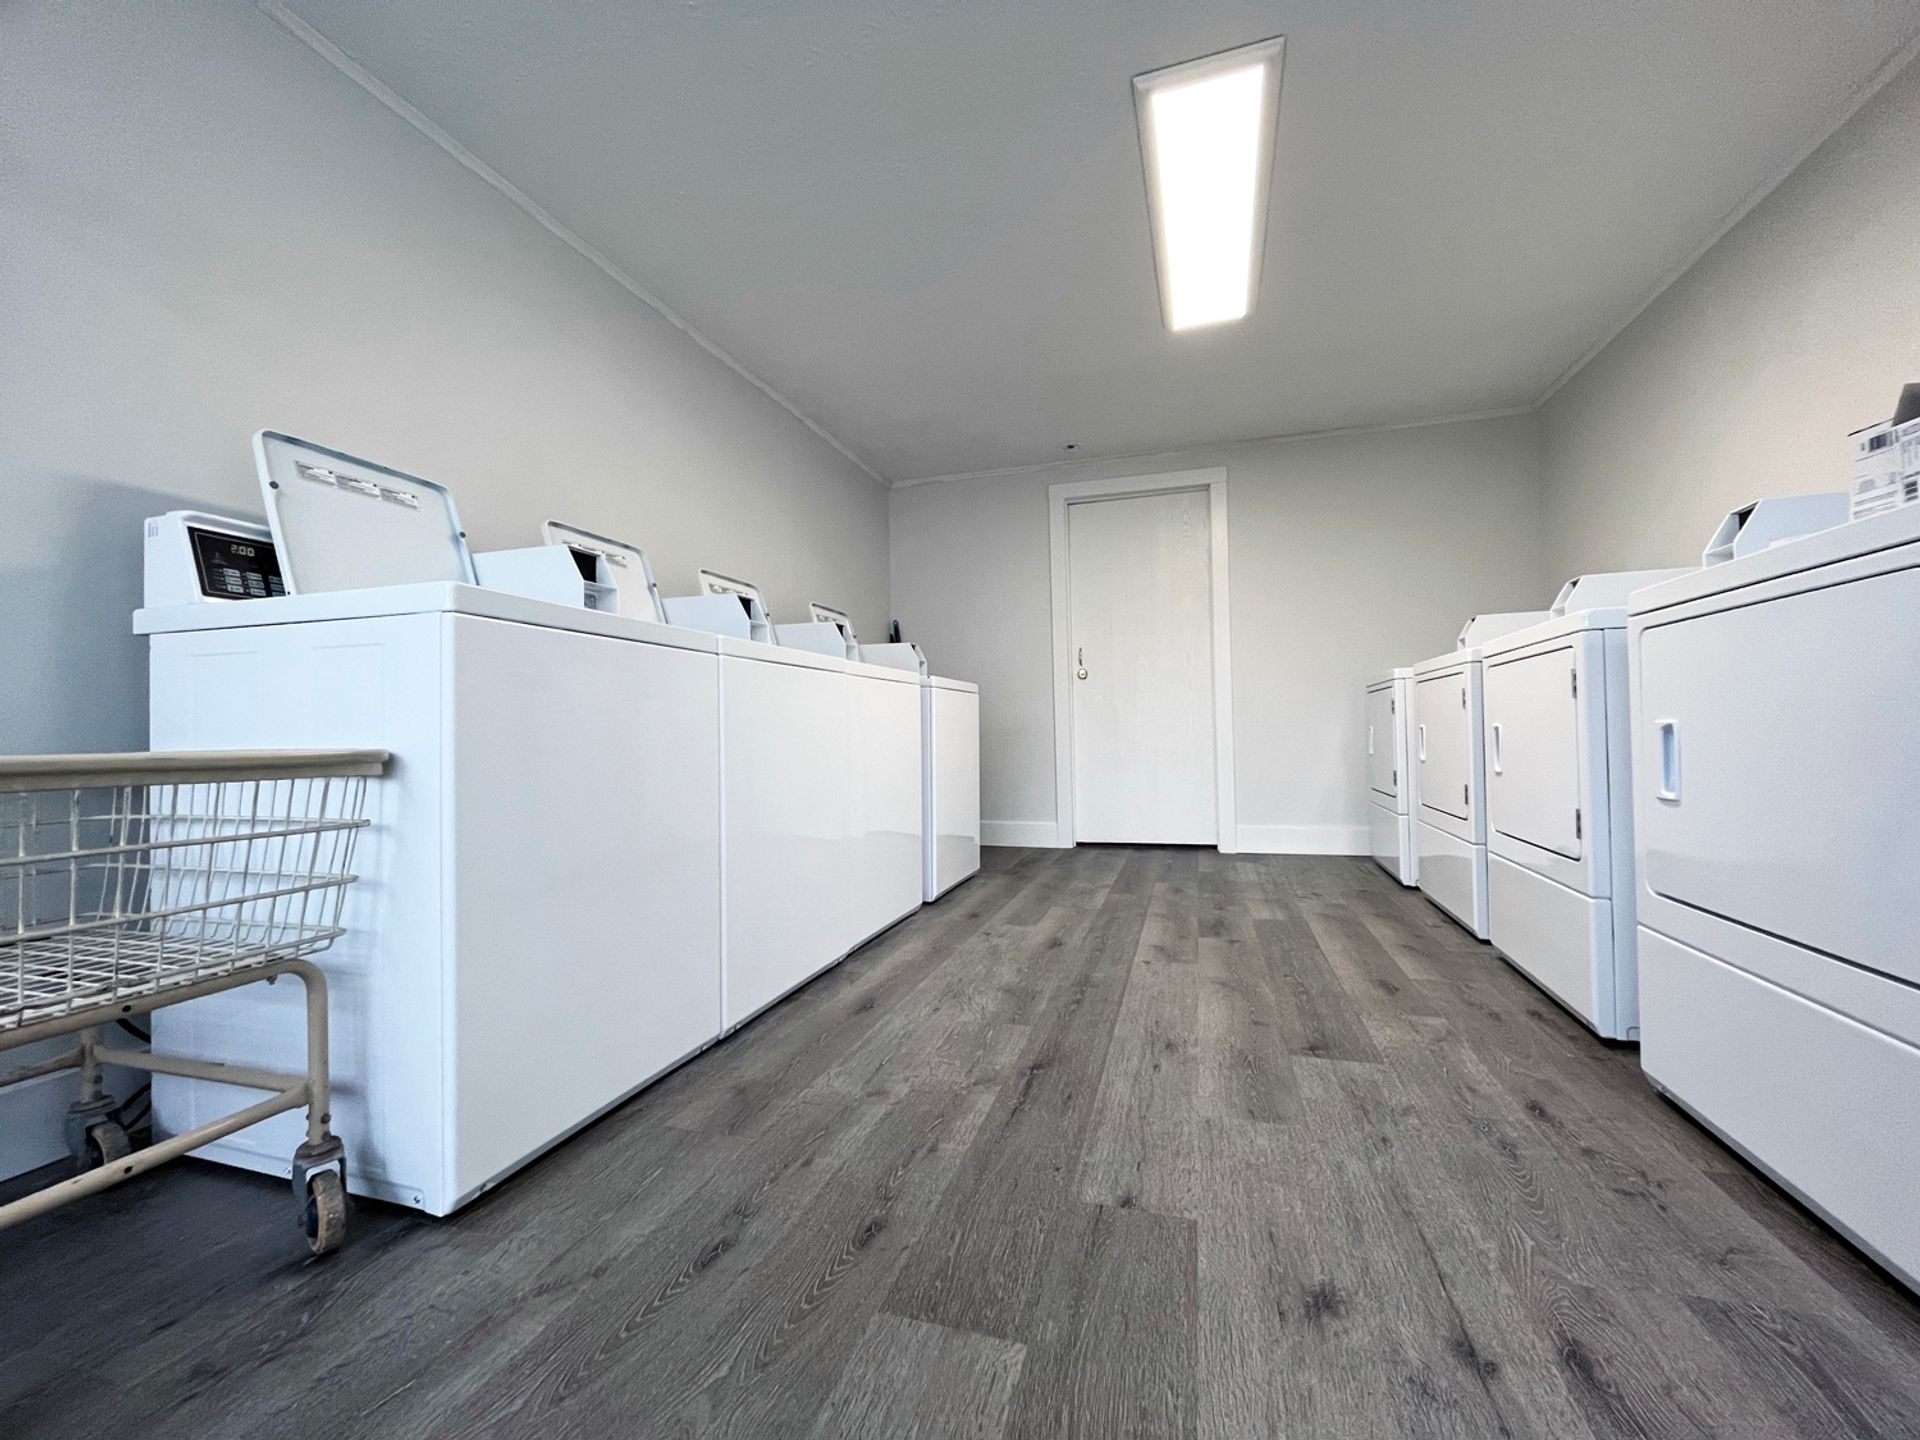 1 Bed and 1 Bath Apartments for Rent | Newly Renovated Image